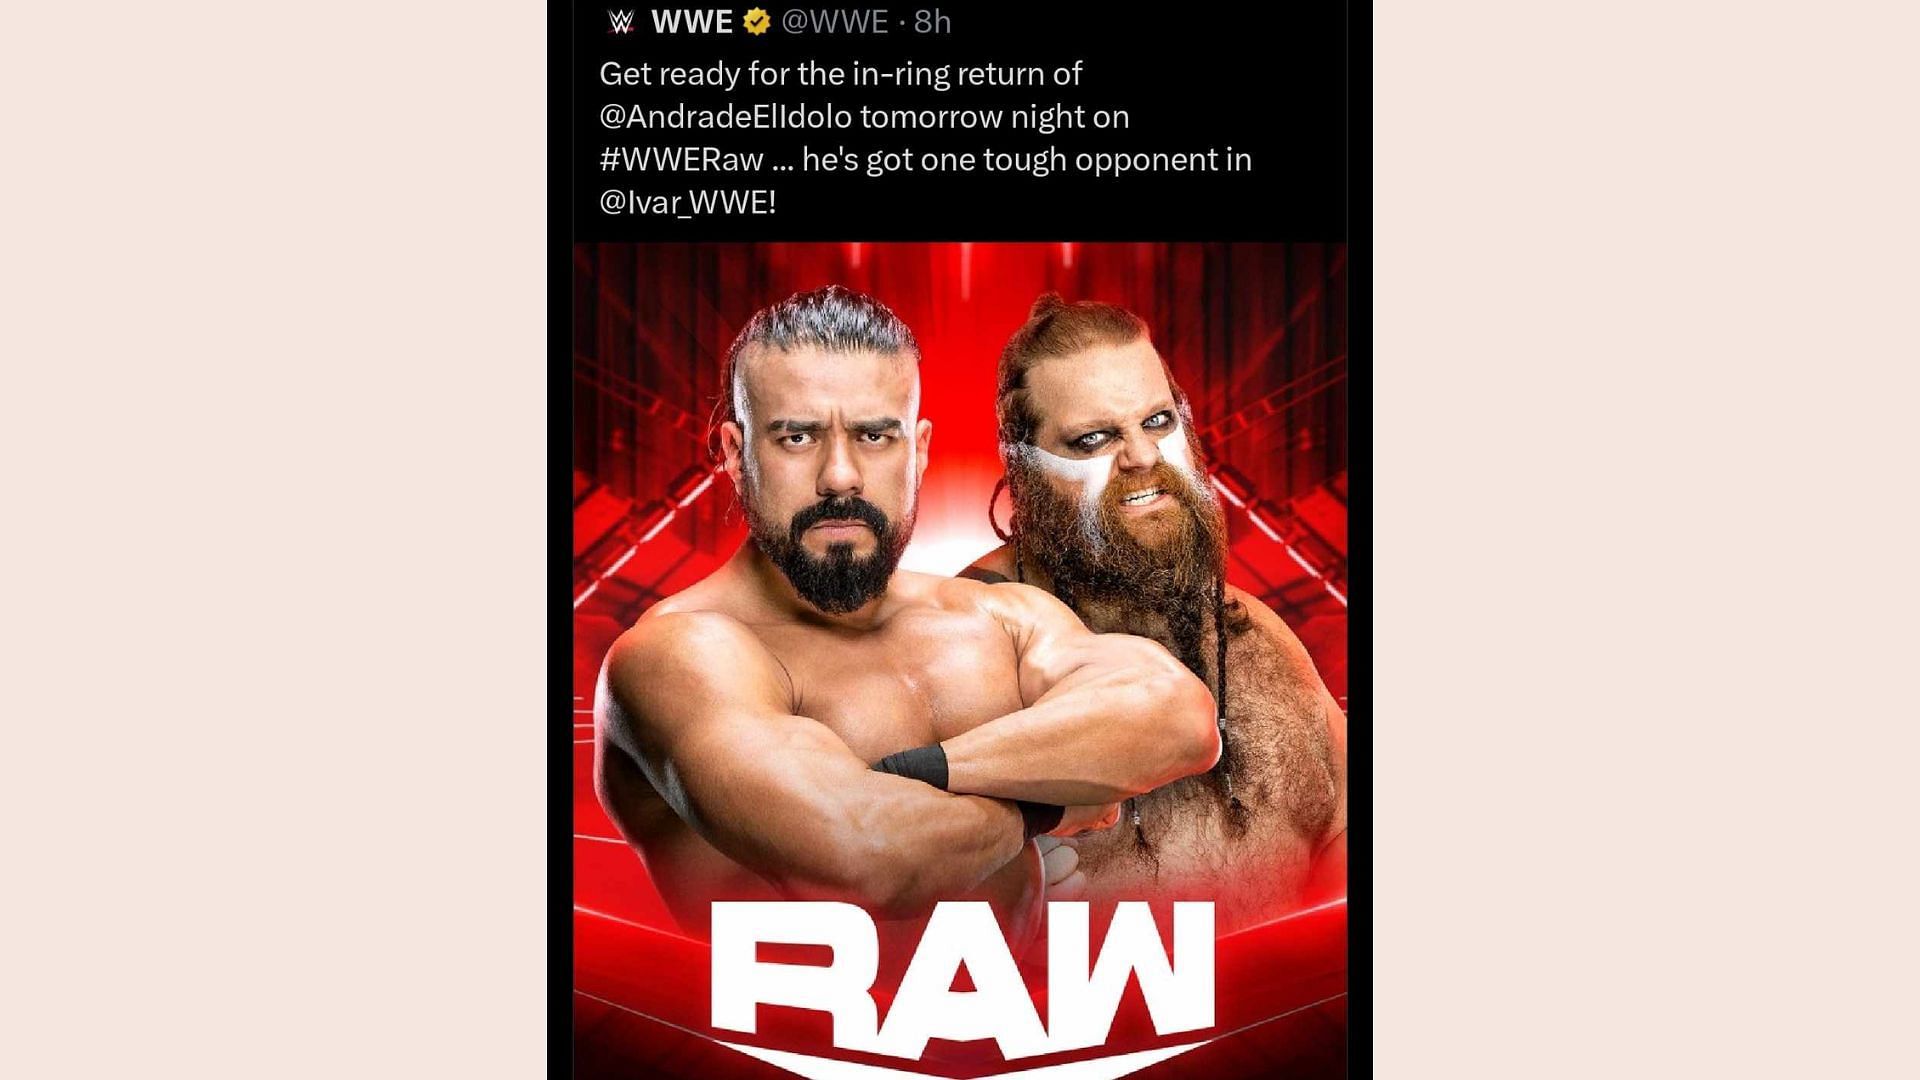 The deleted tweet about Andrade vs. Ivar